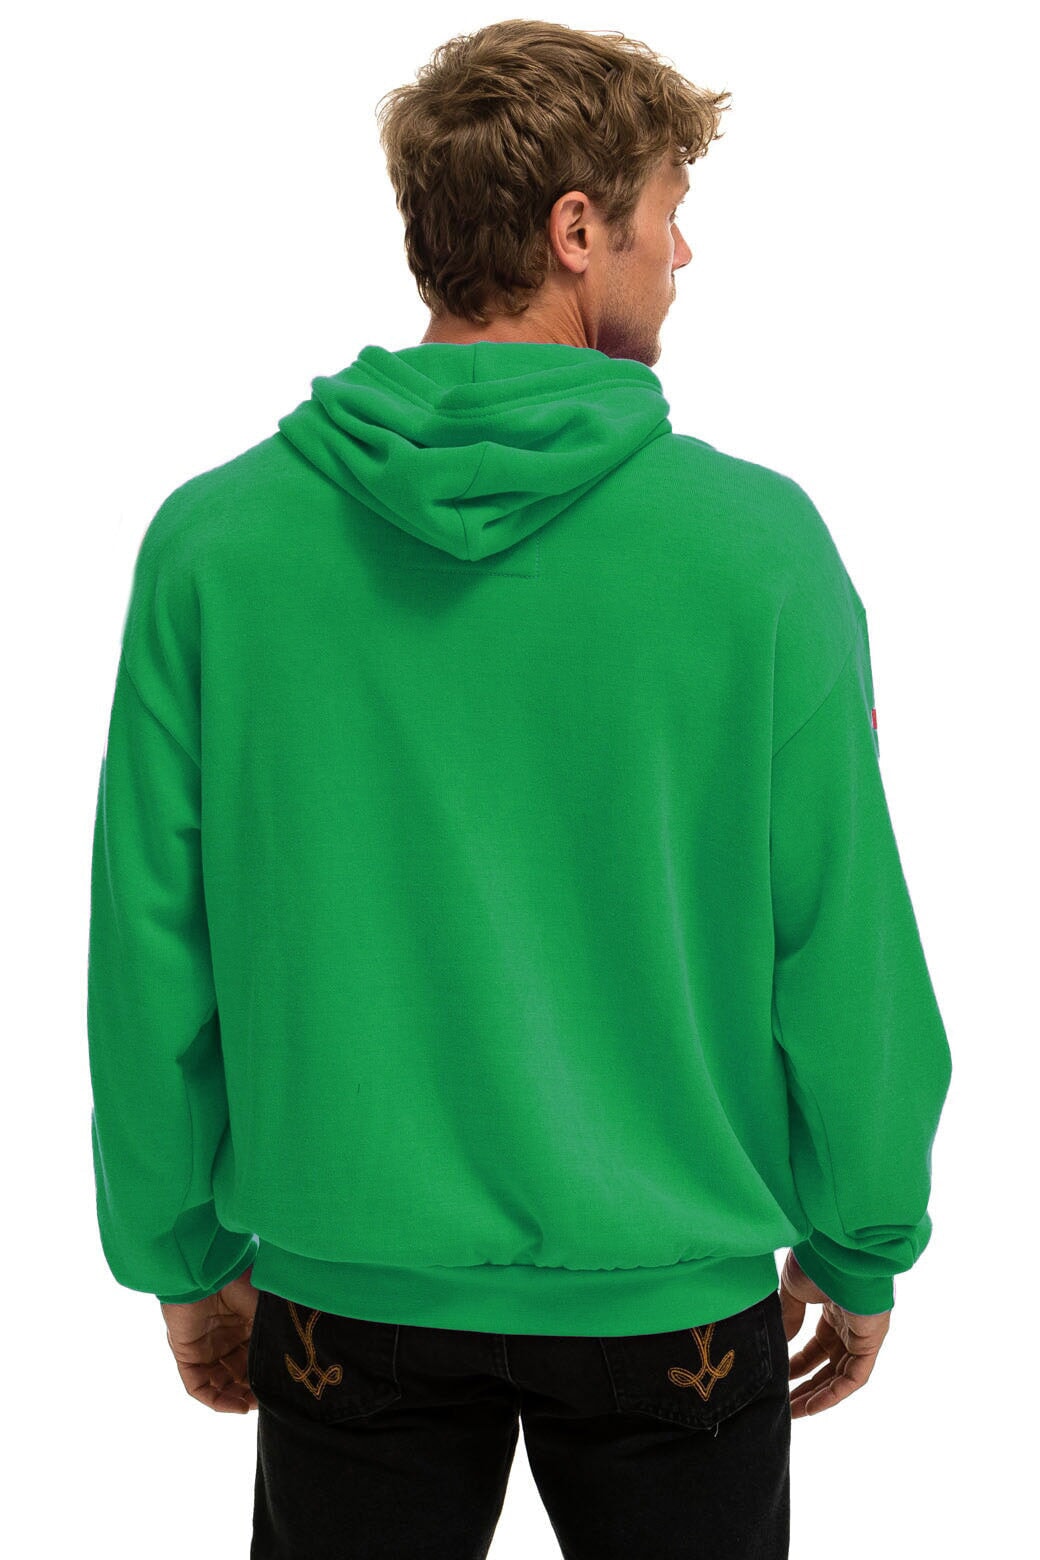 AVIATOR NATION SAN FRANCISCO RELAXED PULLOVER HOODIE - KELLY GREEN Hoodie Aviator Nation 